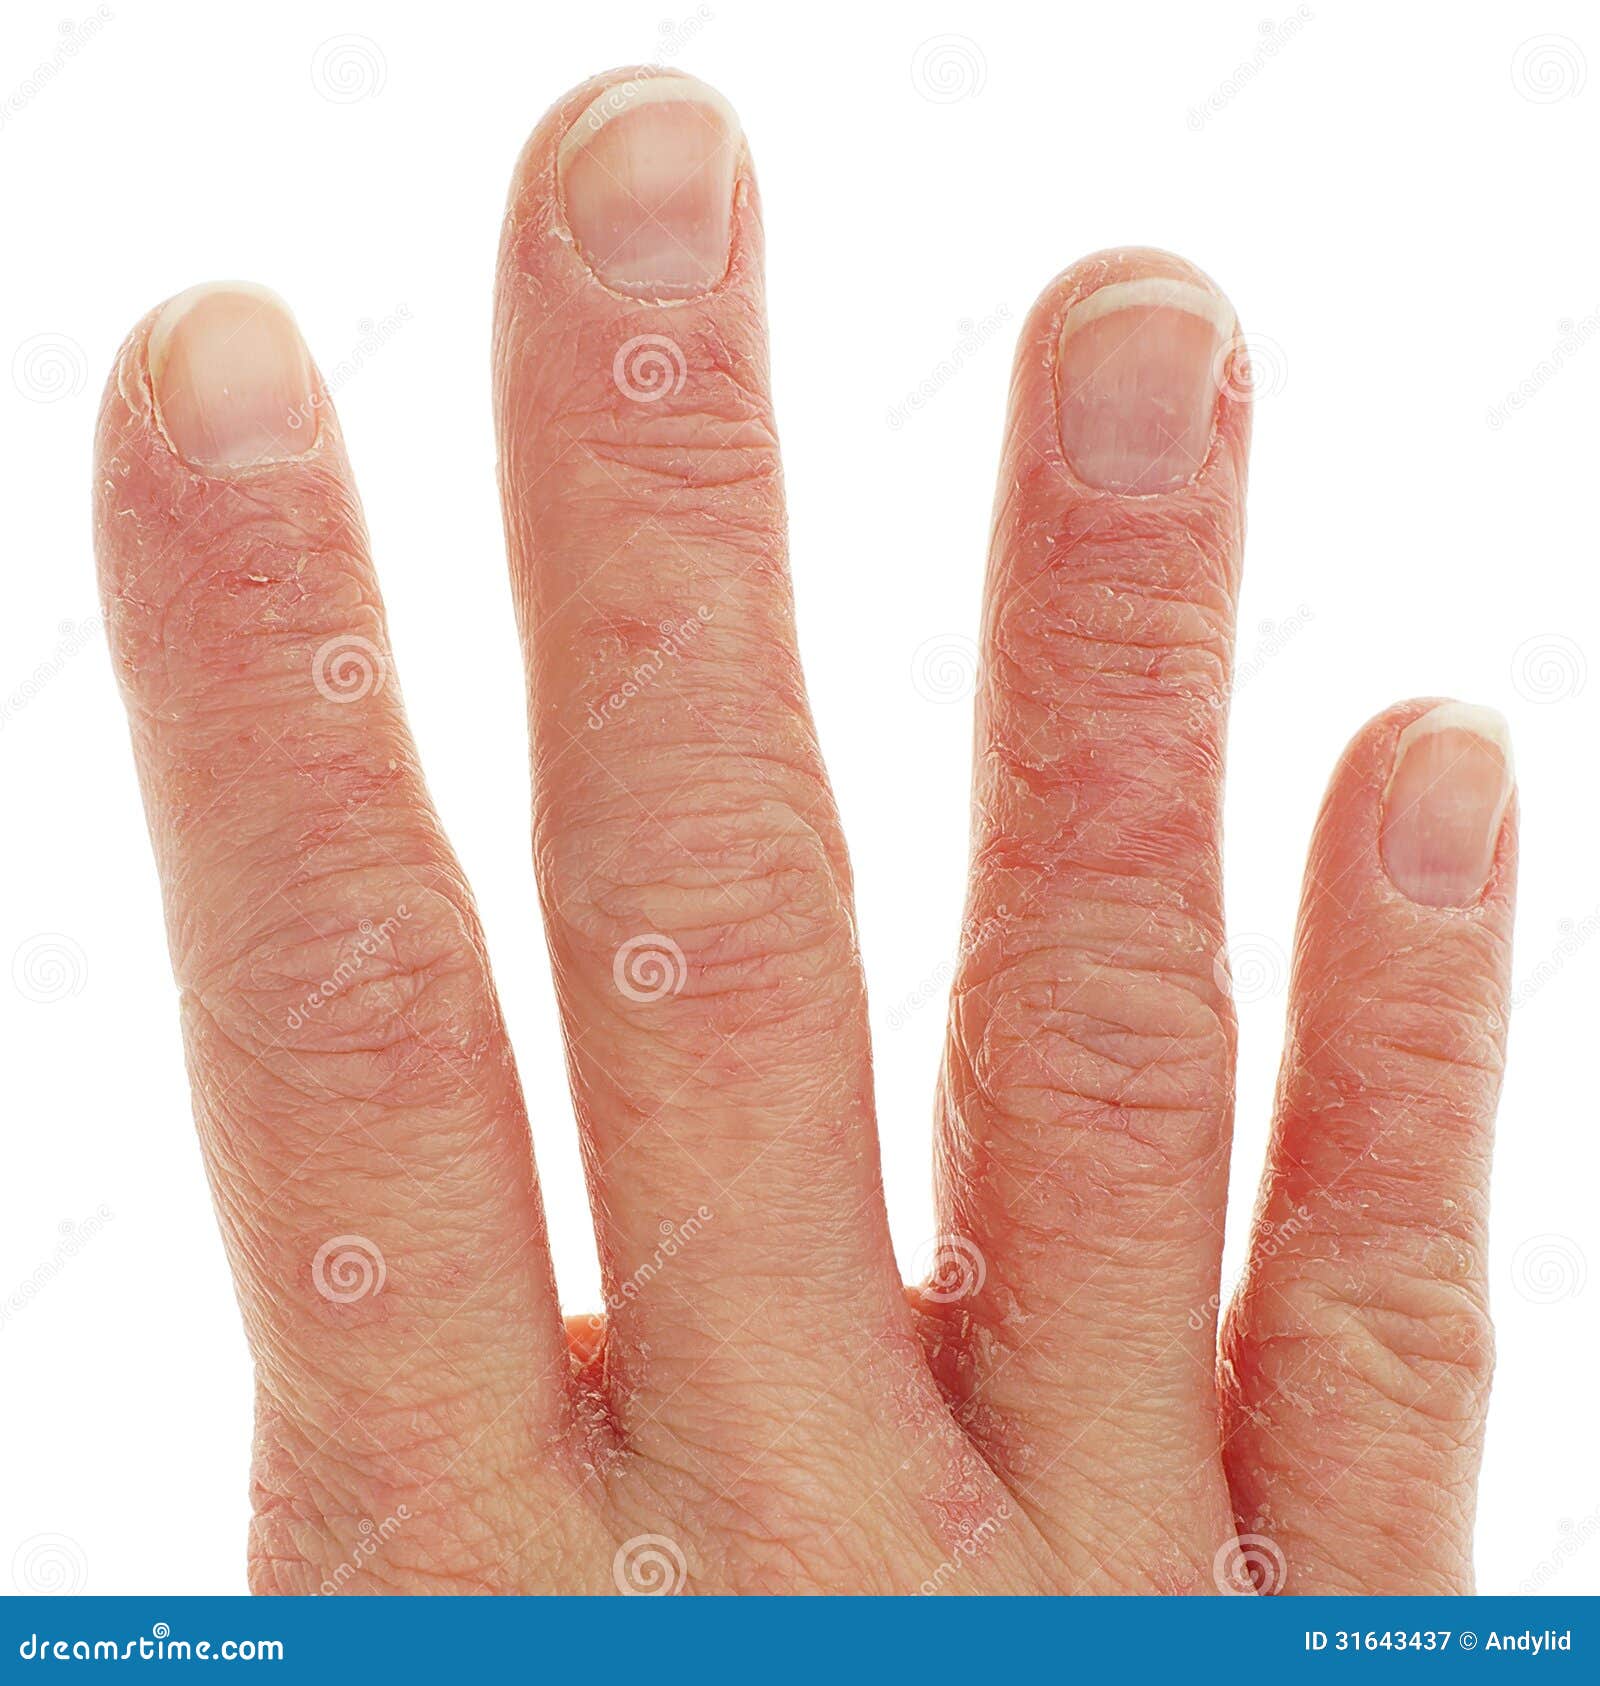 images of contact dermatitis #10